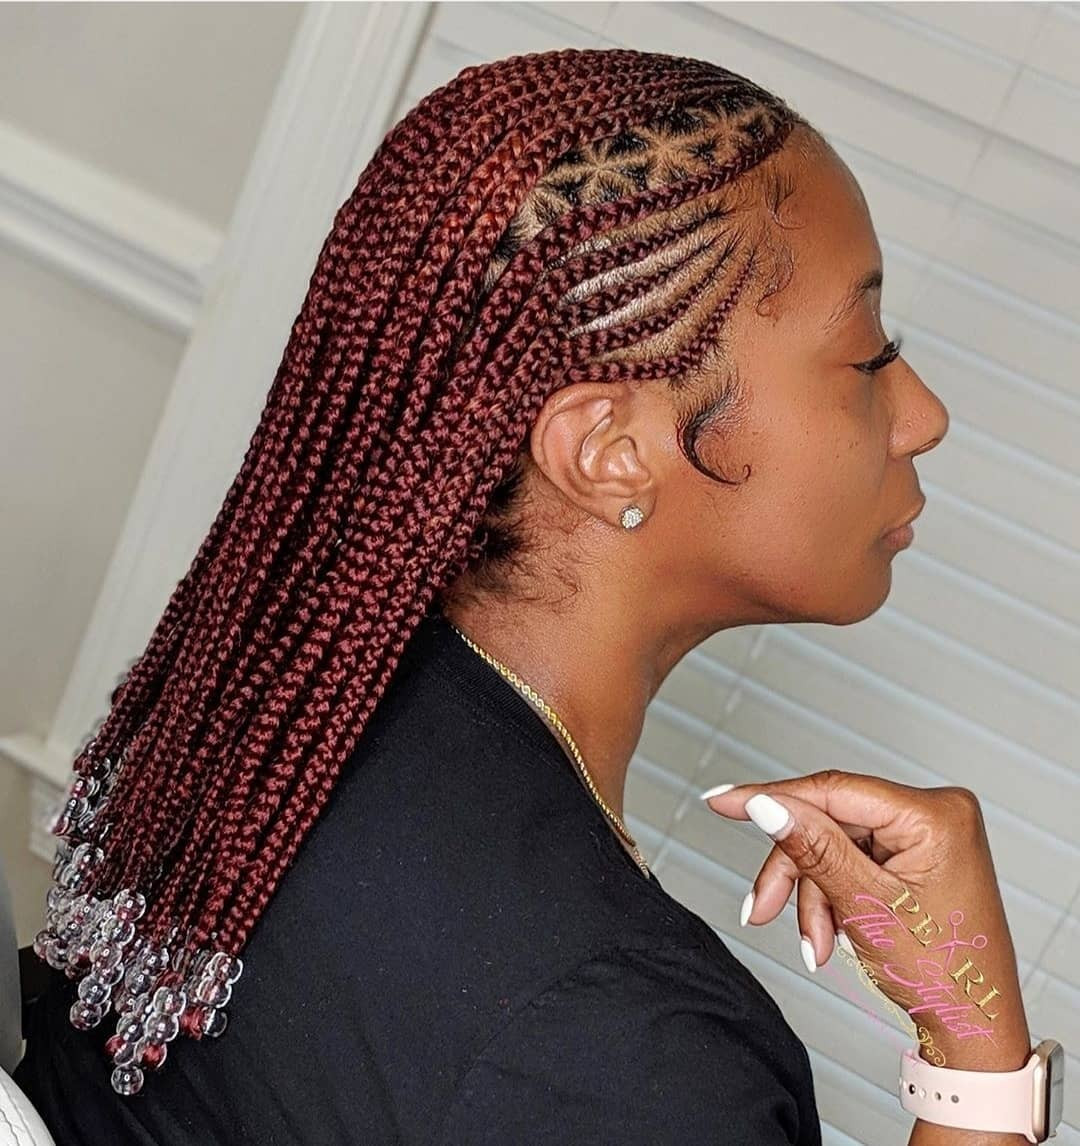 Braids Hairstyles 2020 White Girl
 2020 Braided Hairstyles That Are Totally Hip and Cute